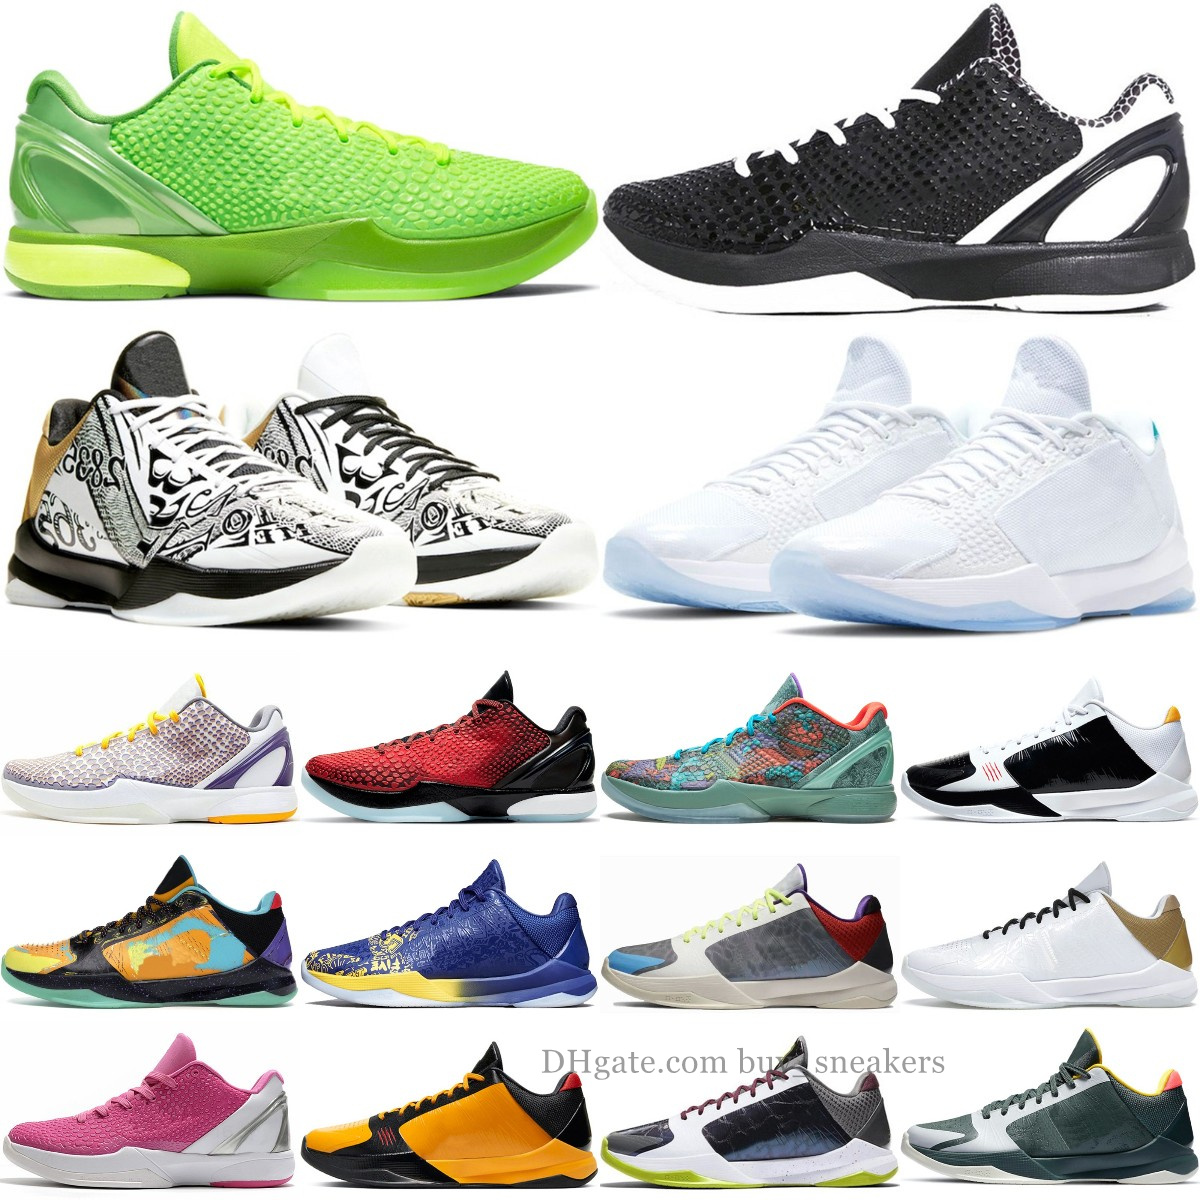 

6 Mamba Mens casual Basketball Shoes Zoom Protro Prelude Mambacita Grinch Think Pink 5 Alternate Bruce Lee Del Sol Big Stage Lakers 24 outdoor sports sneakers, Box